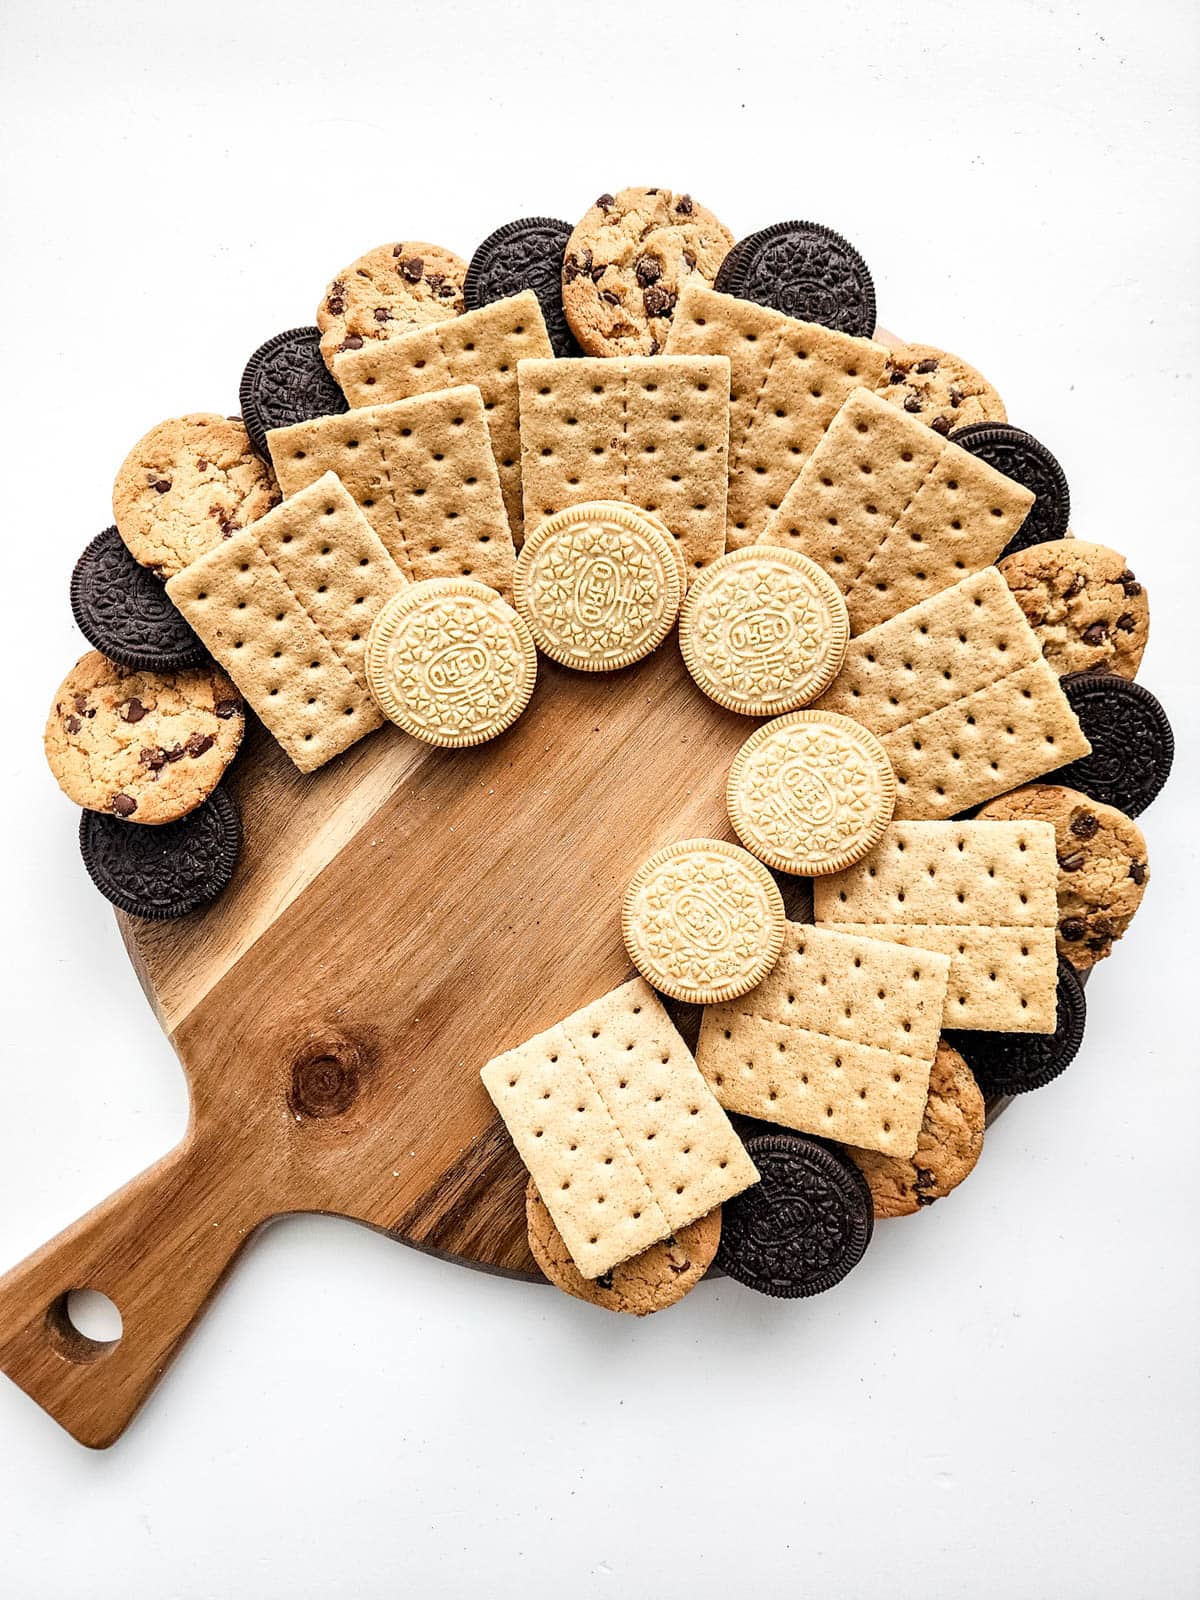 Wooden cutting board with cookies and graham crackers